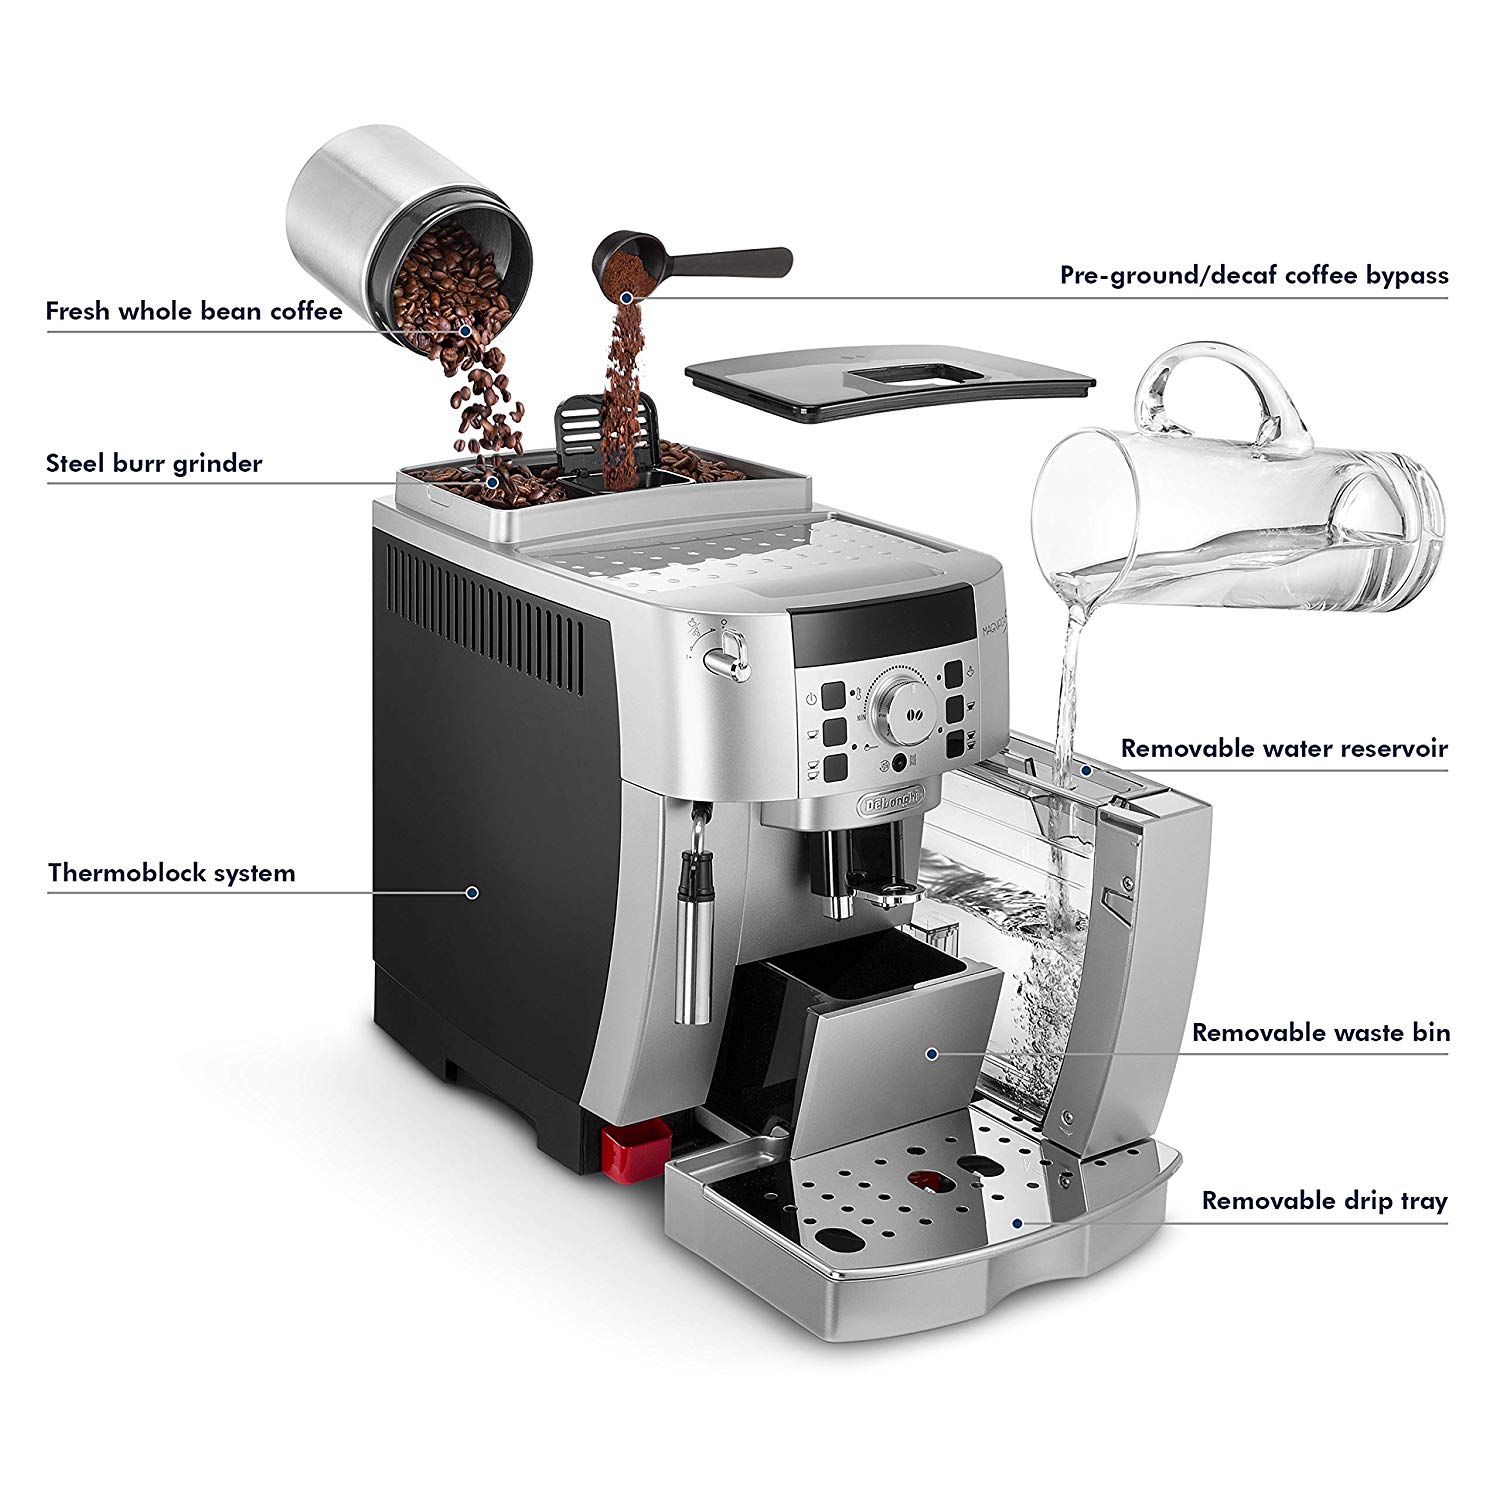 5 Best Coffee And Espresso Maker Combos Reviewed In Detail Aug 2021